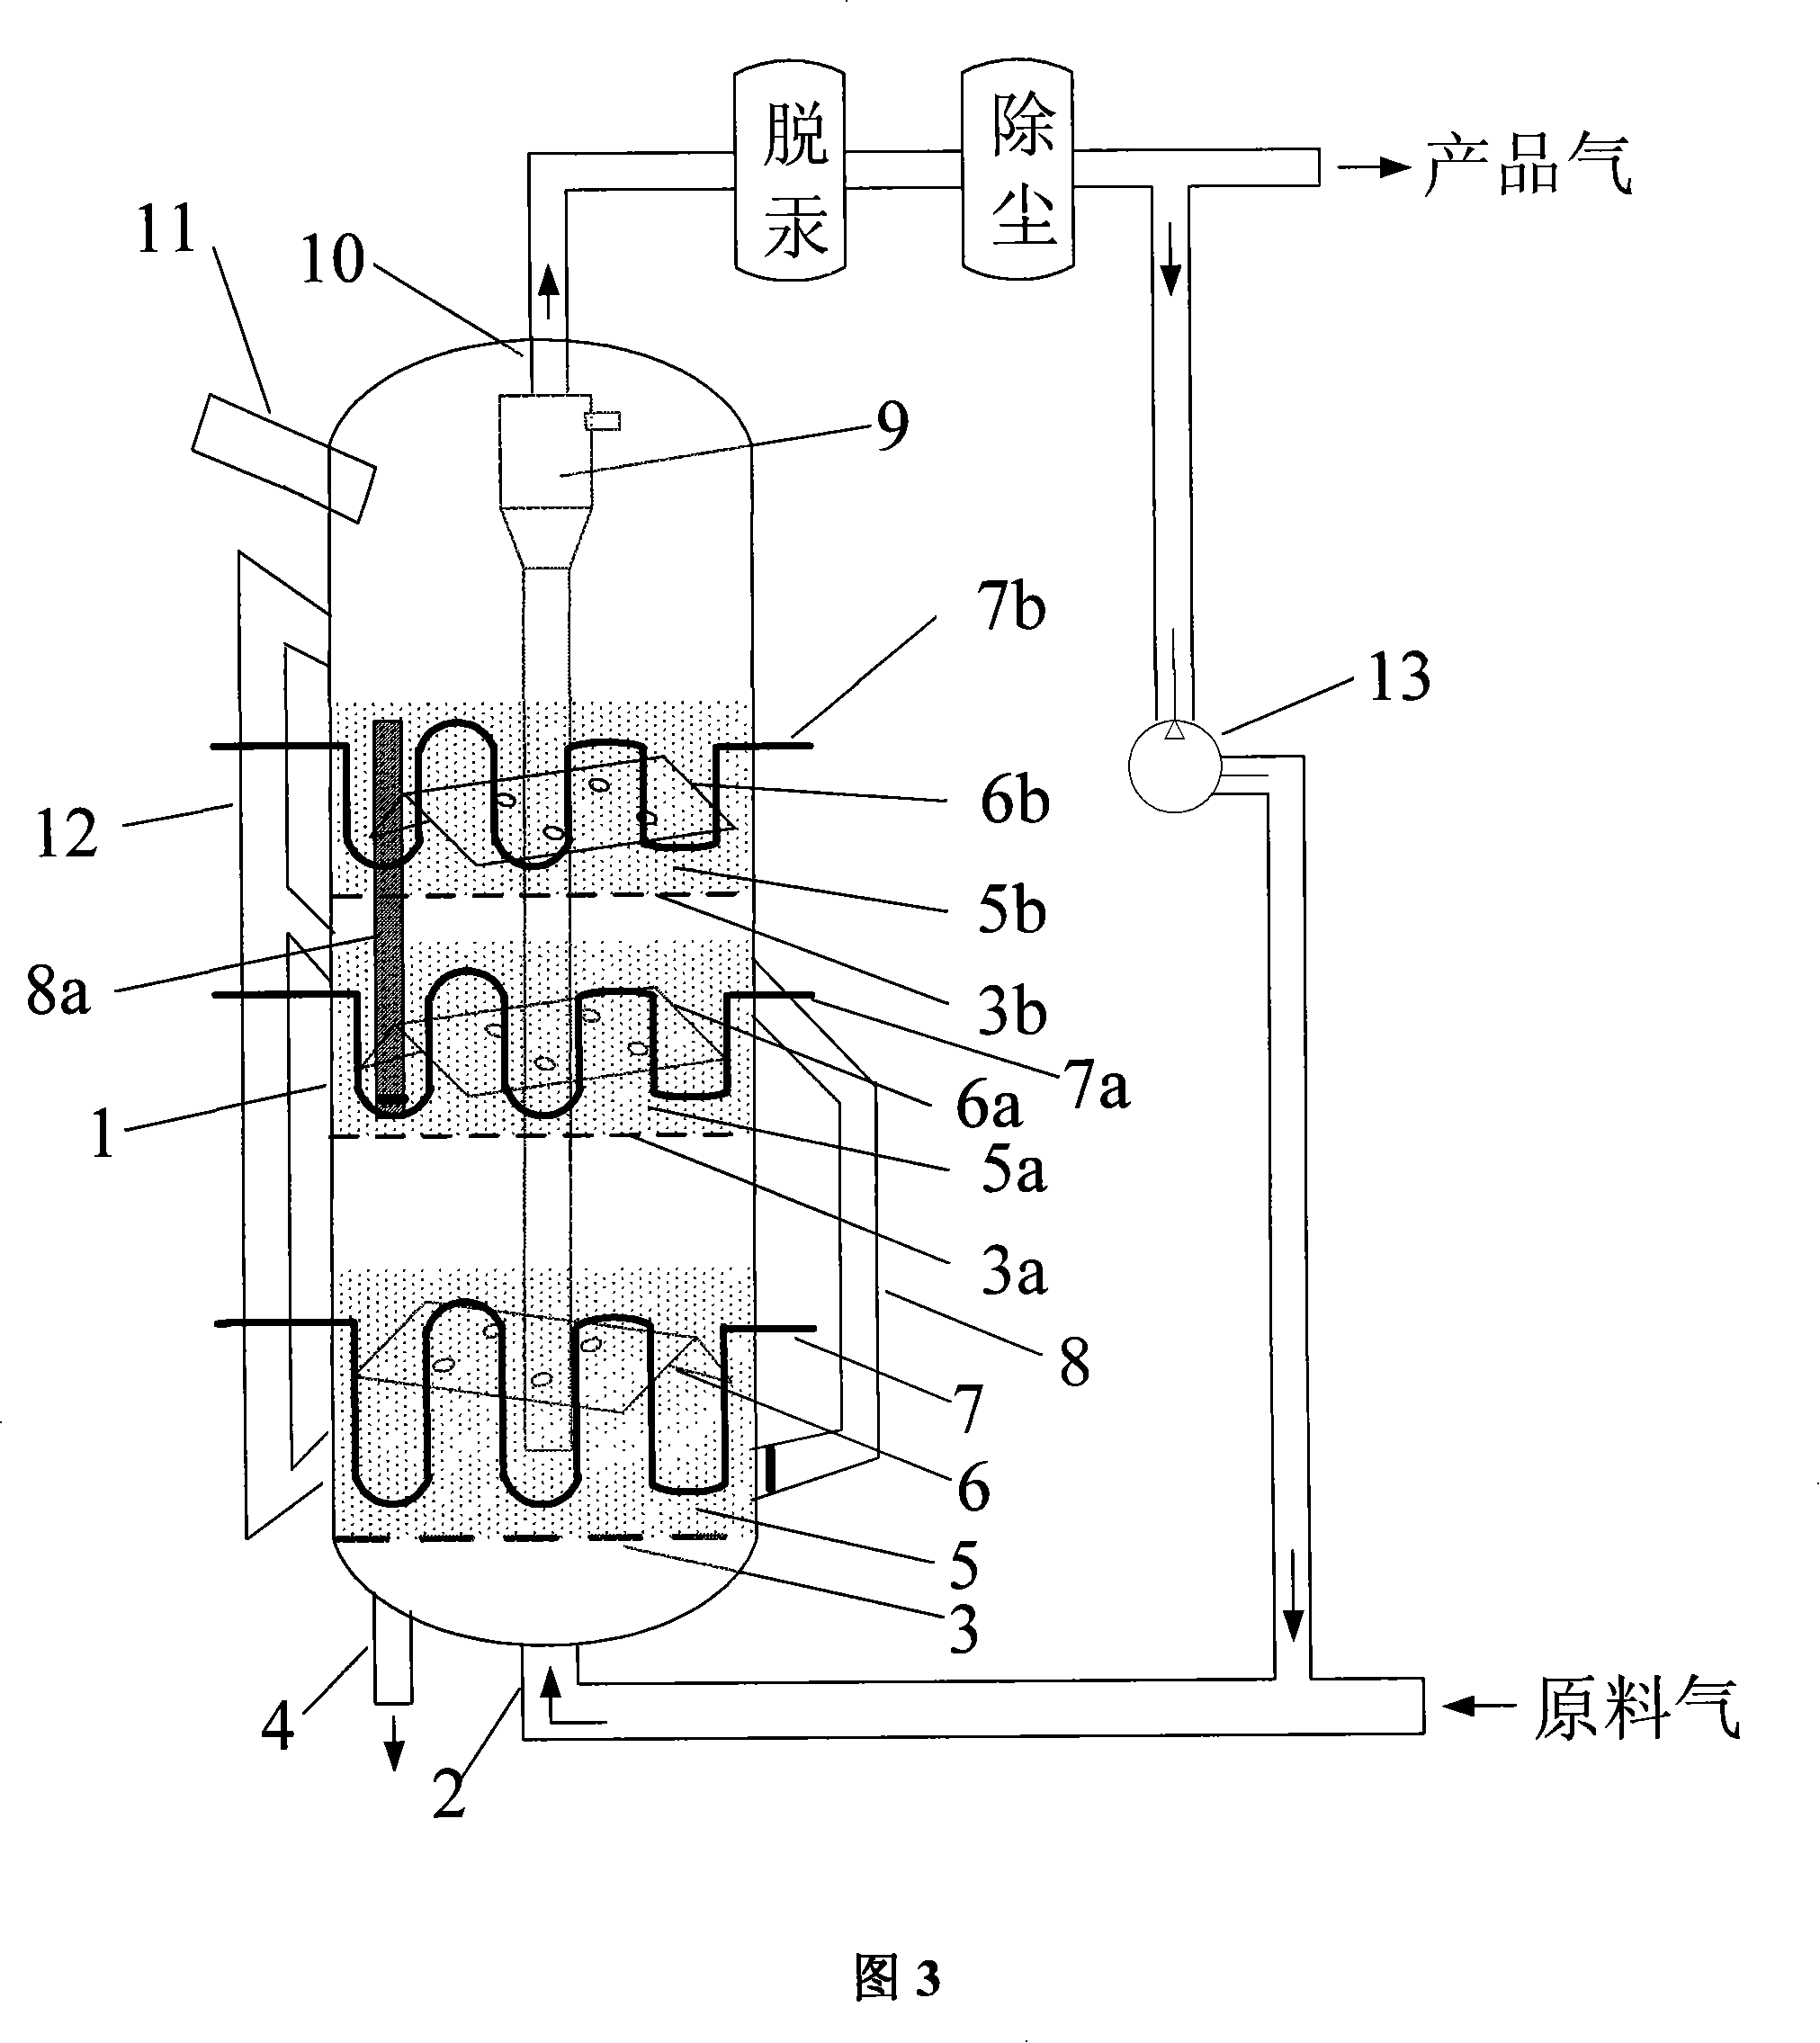 Method for preparing vinyl chloride by circulating fluidized bed reactor and device thereof